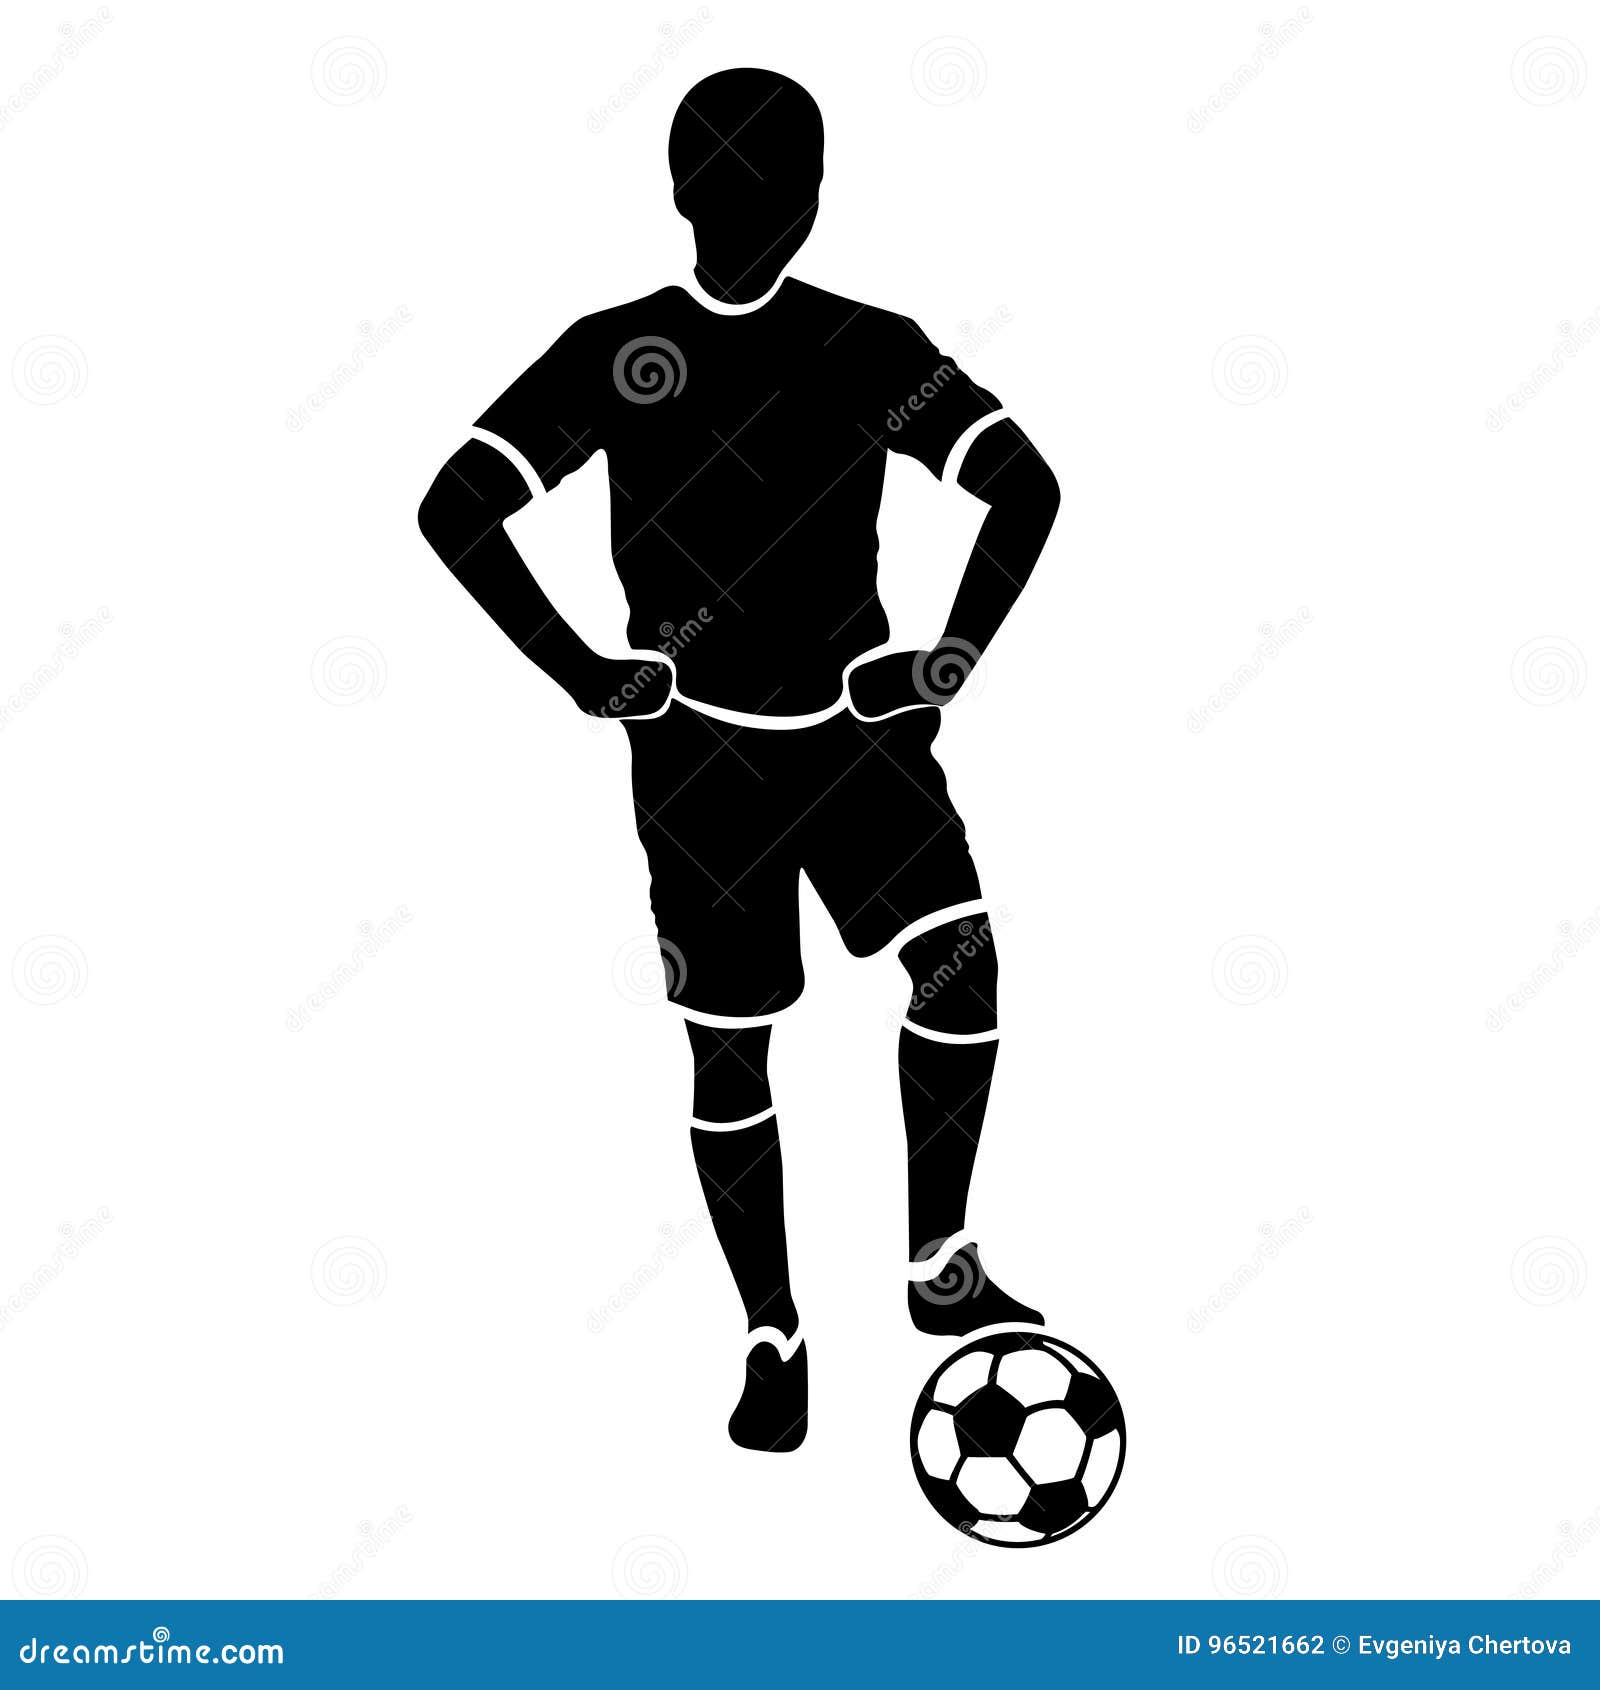 footballer silhouette. black football player outline with a ball,  on white background.  